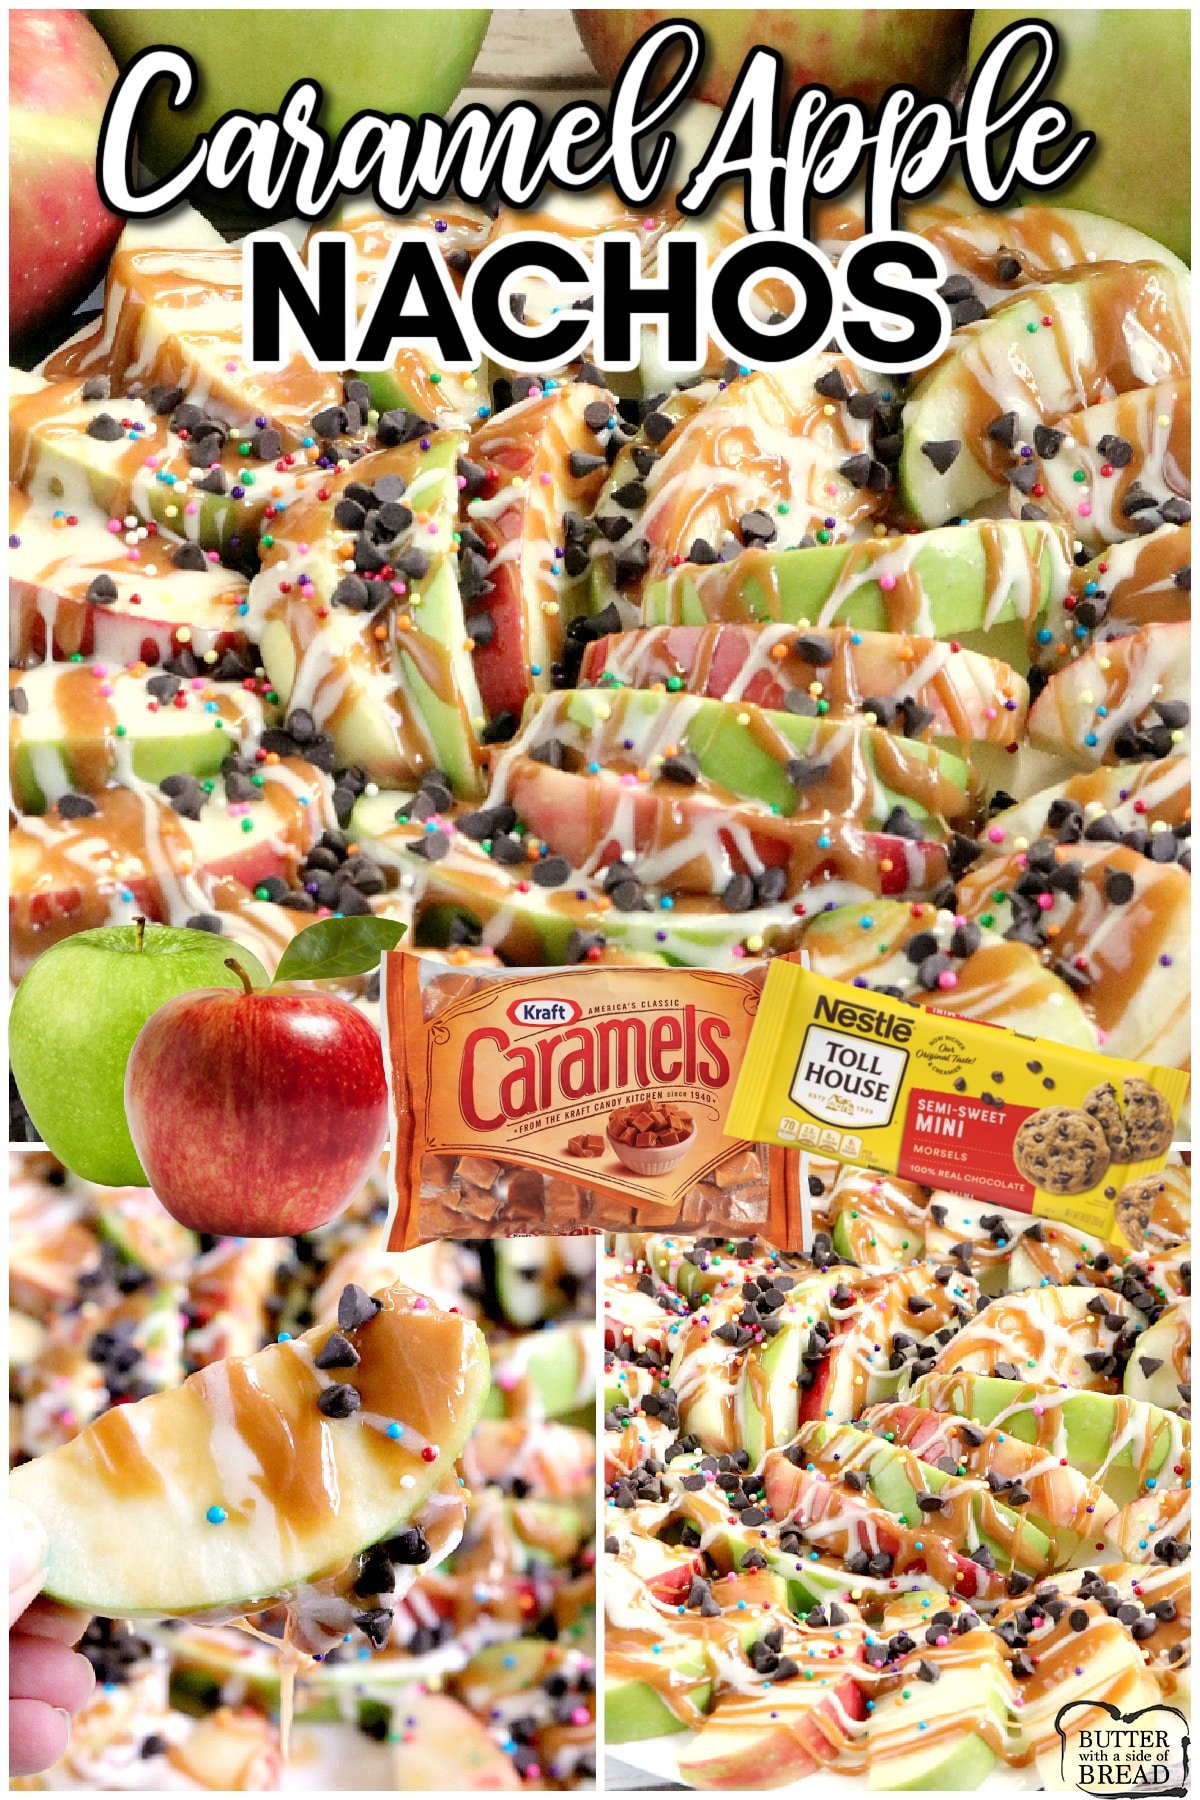 Caramel Apple Nachos are easily made by topping sliced apples with caramel, melted marshmallows, chocolate chips and sprinkles! This fun variation of a traditional caramel apple recipe is easier to share and easier to eat too!